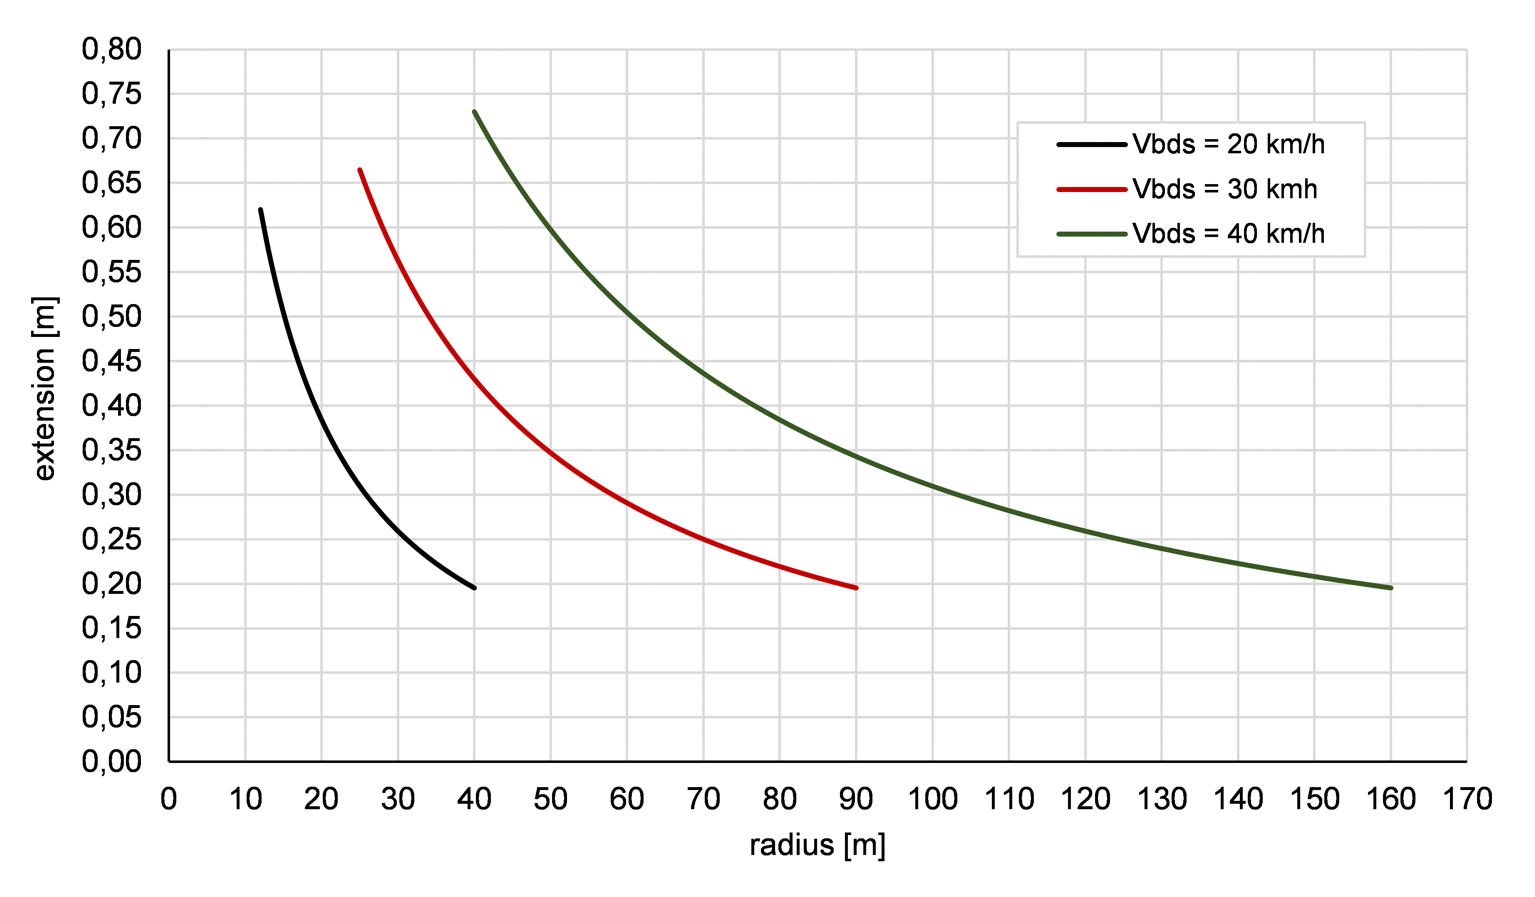 Fig. 3. Nomograms for calculating widening on curves in the plan depending on the radiuses of those curves and the bicycle design speed.